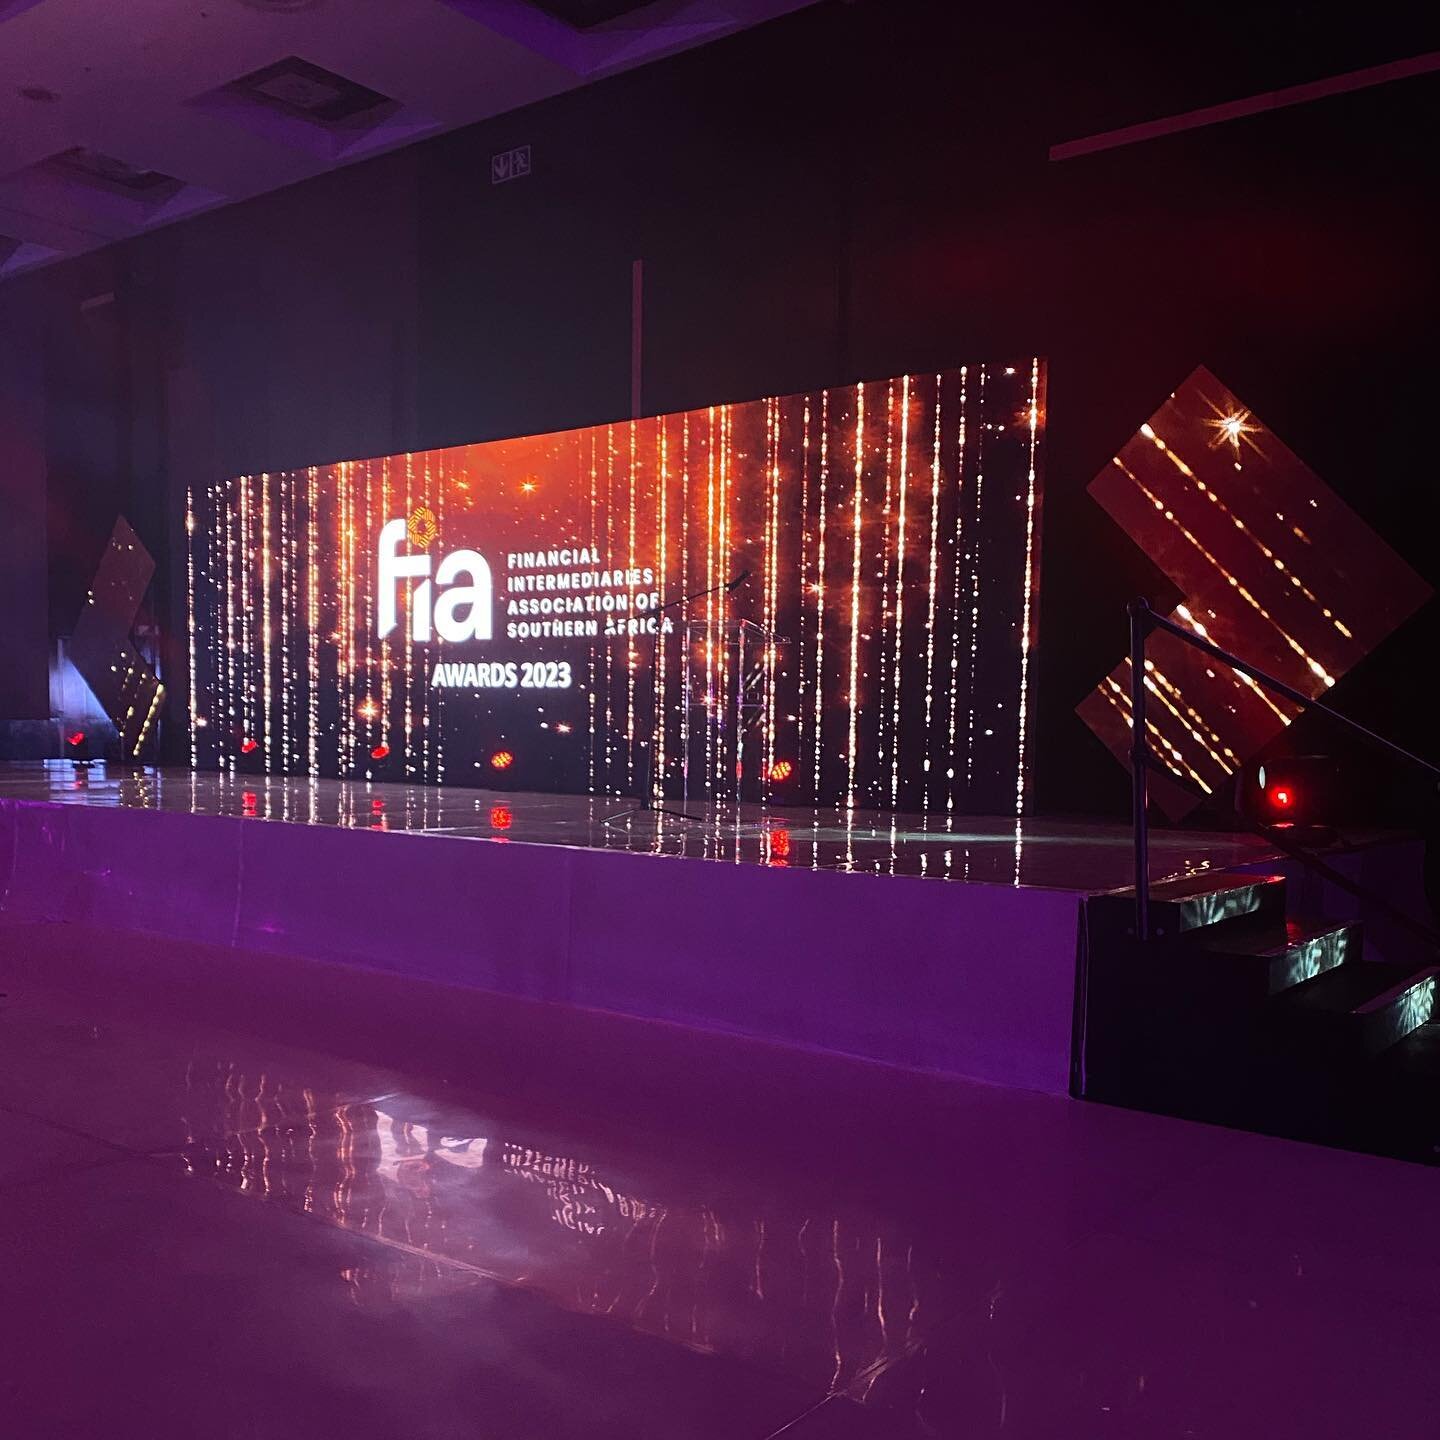 #throwbackthursday to the FIA Awards❤️ EPH done the stage, LED screens, lightning and sound. Well done @getstrongpr with your event!